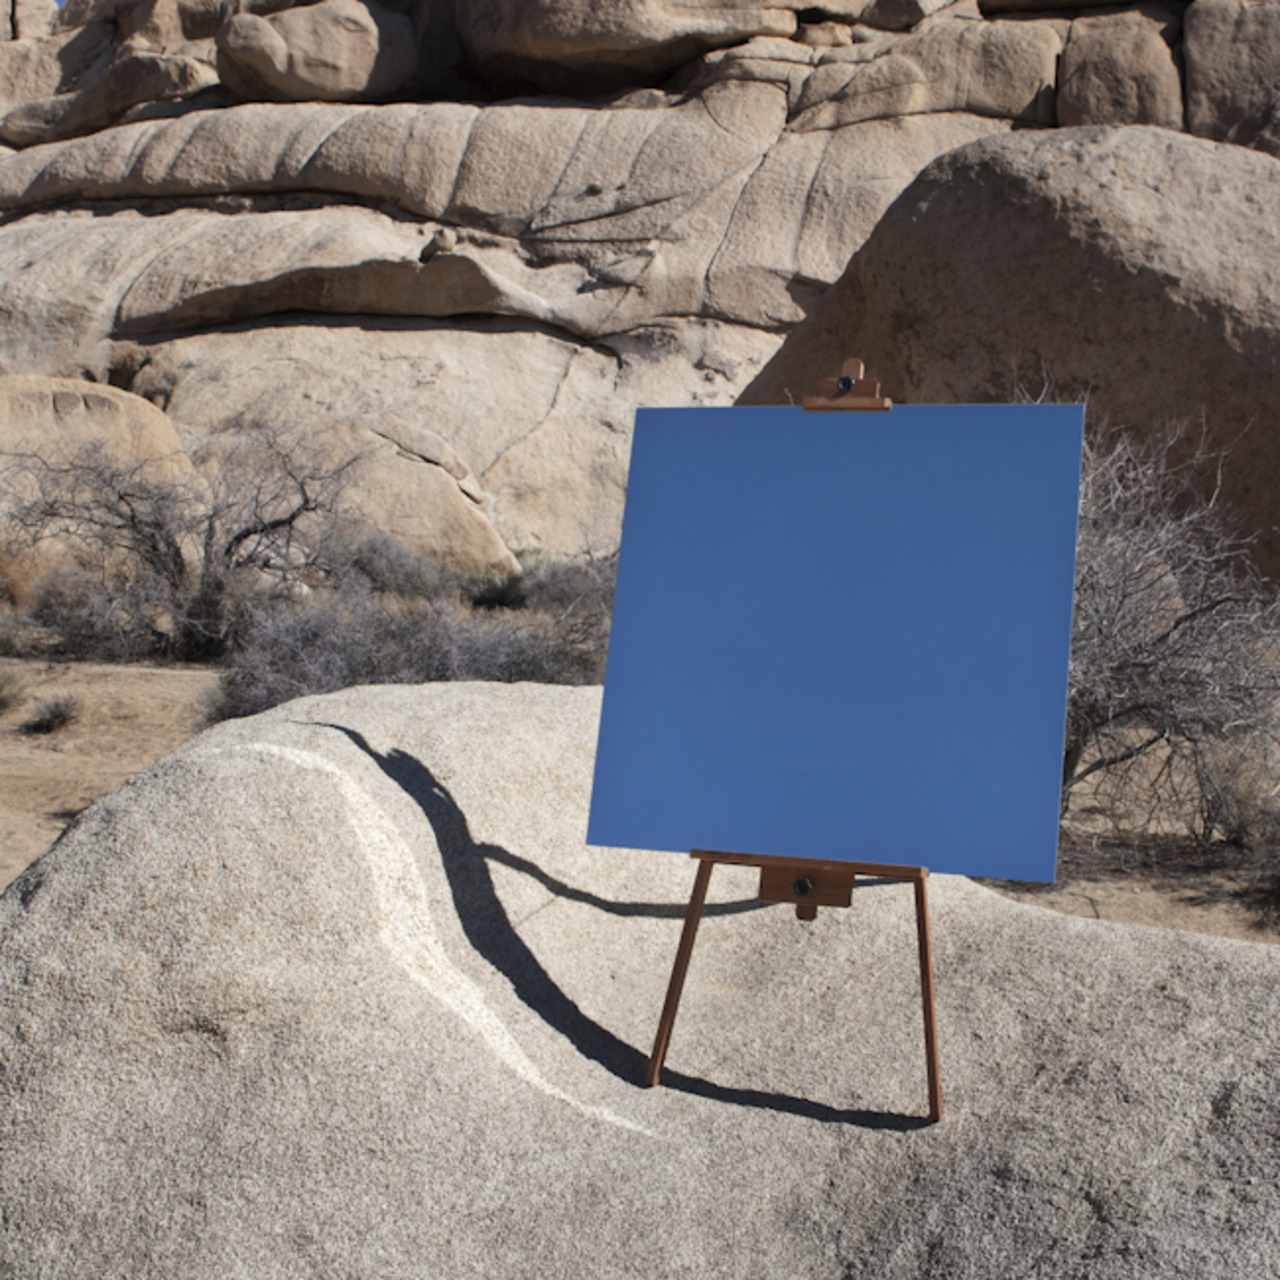 asylum-art:  Photographs of Mirrors on Easels that Look Like Paintings in the Desert